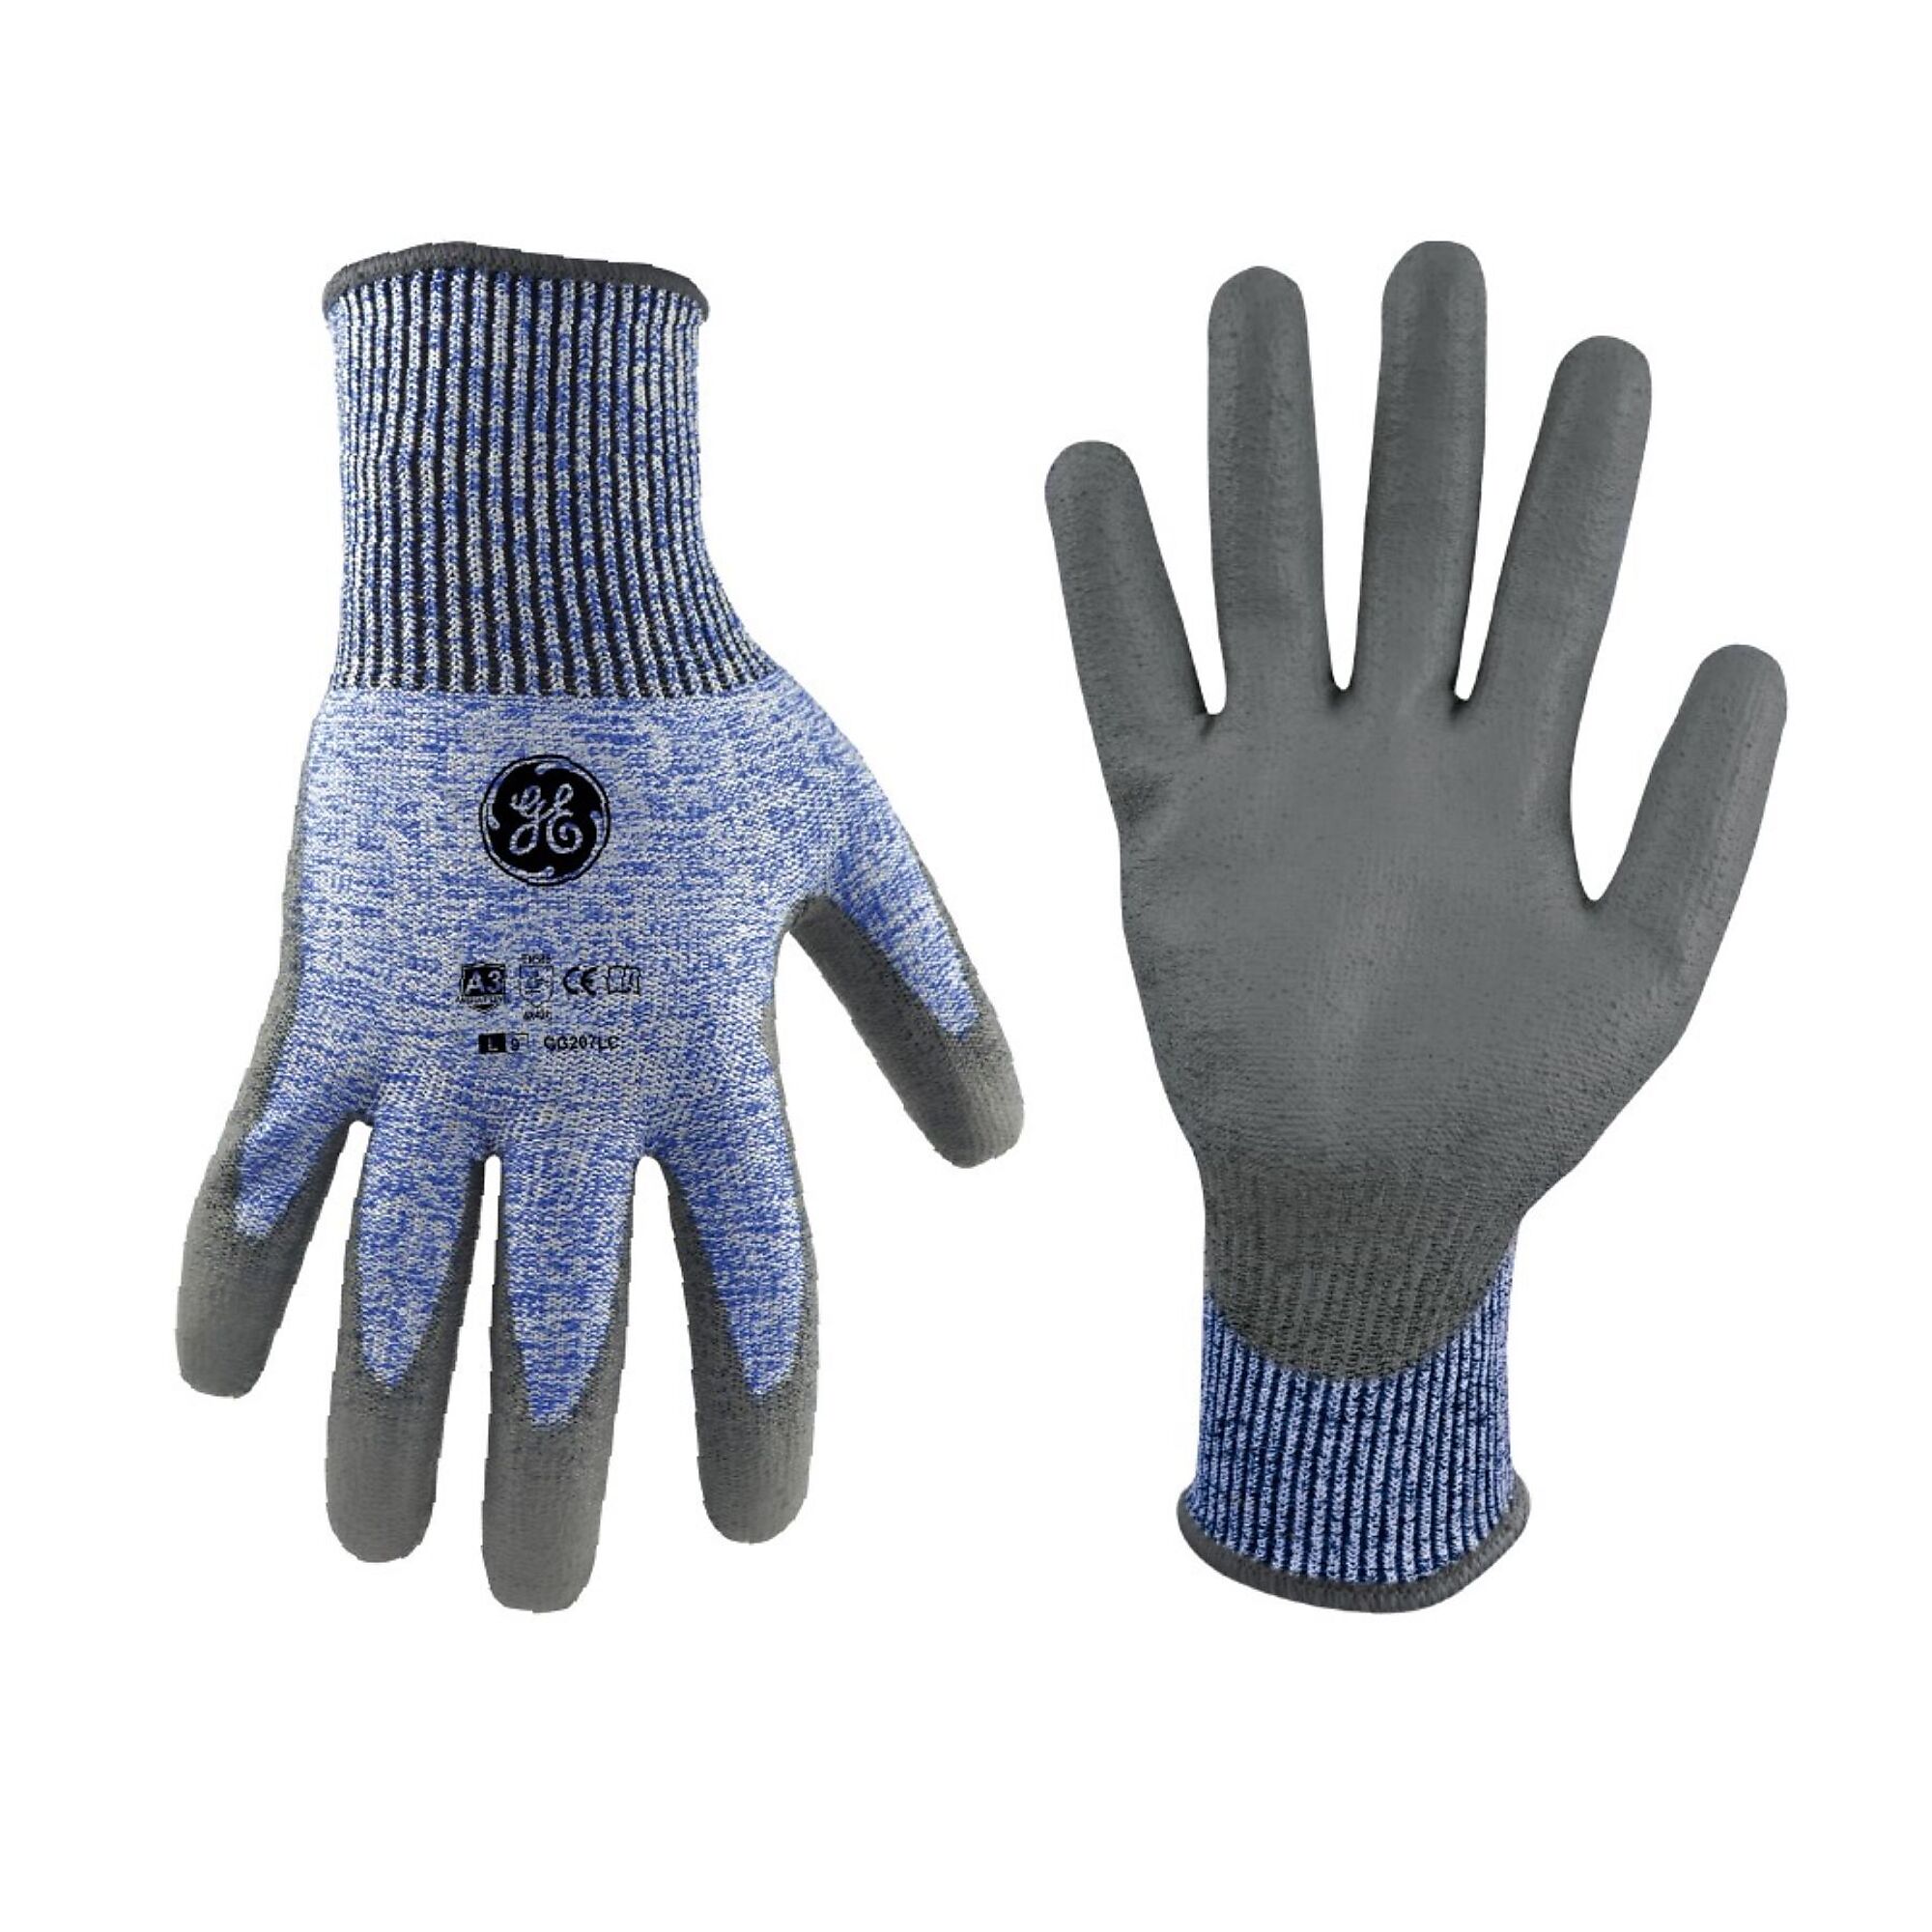 General Electric, Unisex Dipped Gloves Blue/Gray L 12 pair, Size L, Included (qty.) 12, Model GG207L